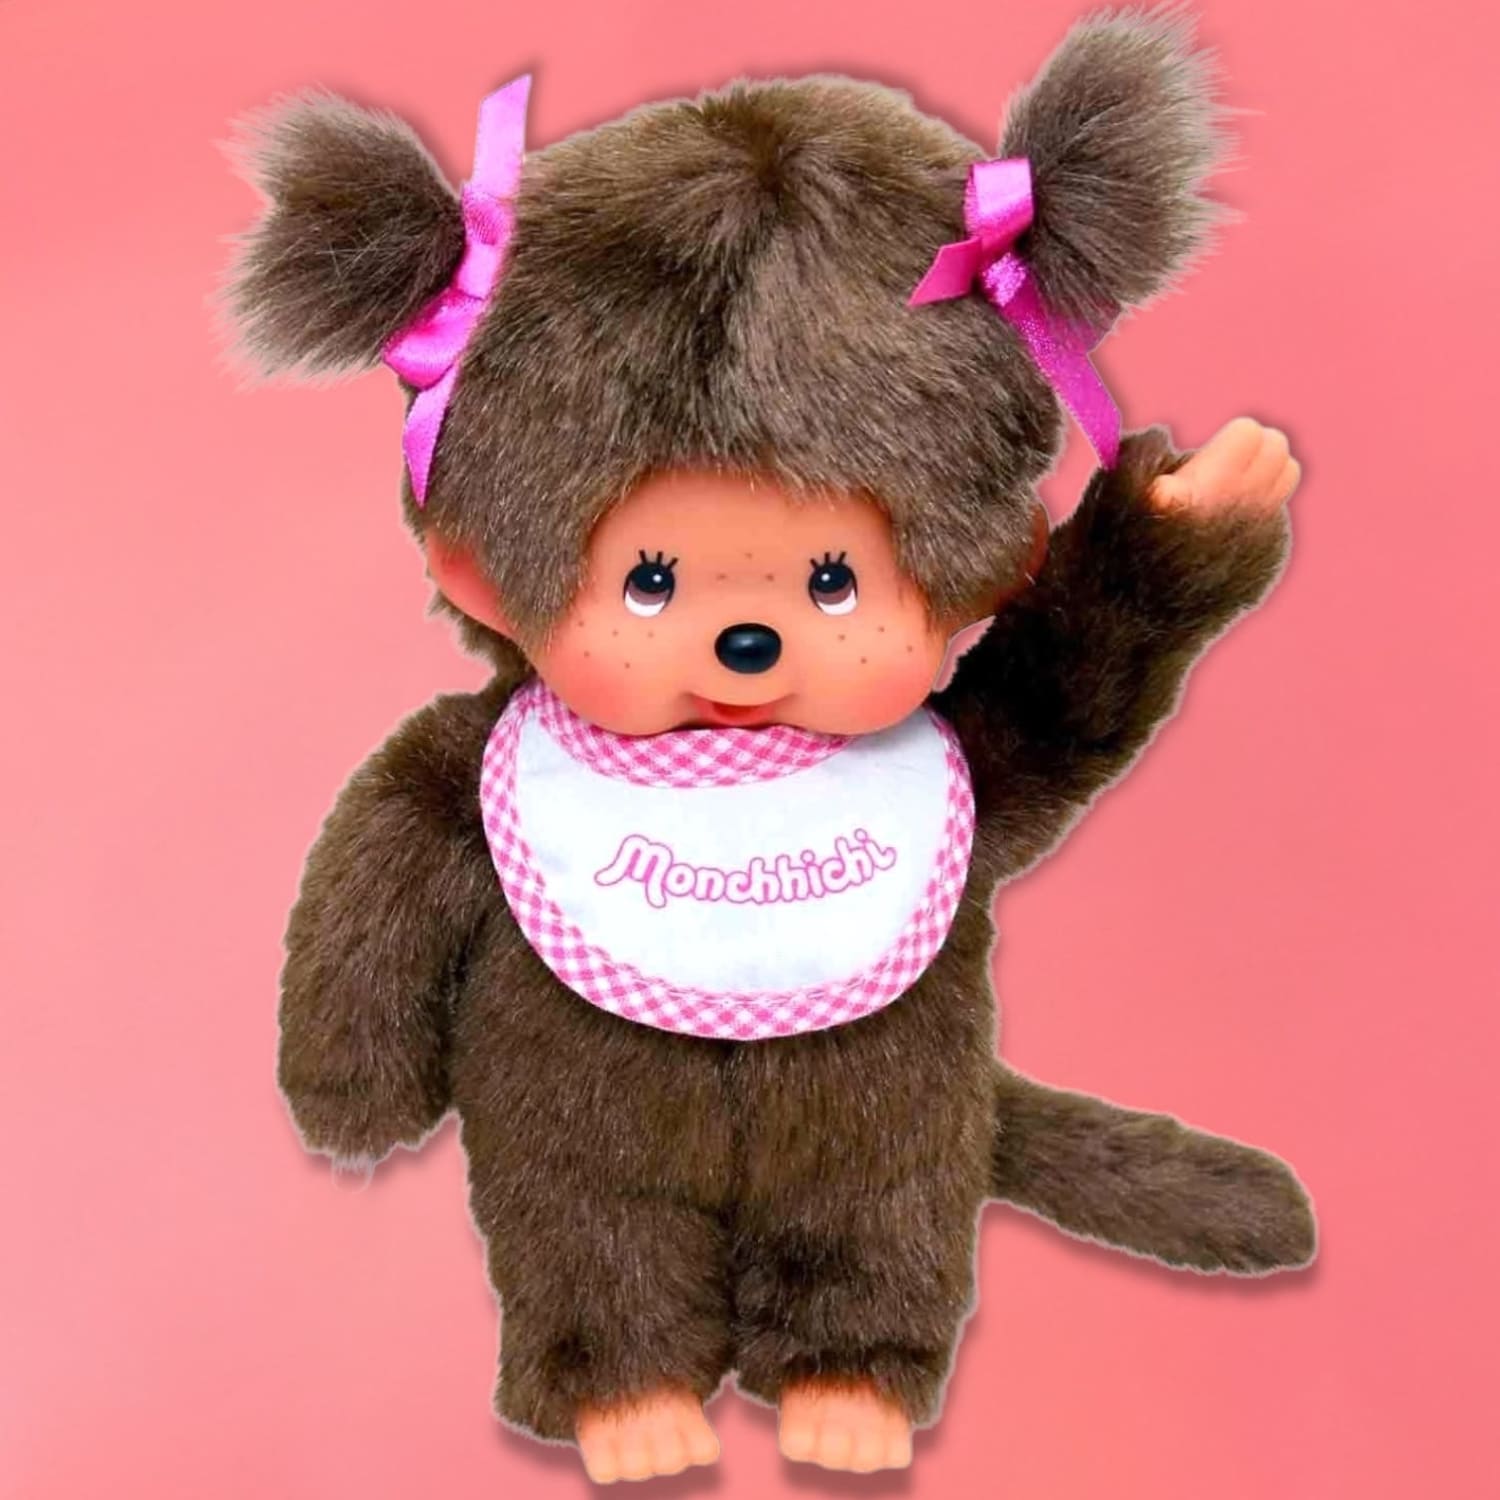 Monchhichi Doll - Classic Girl Classic Girl - Collectible